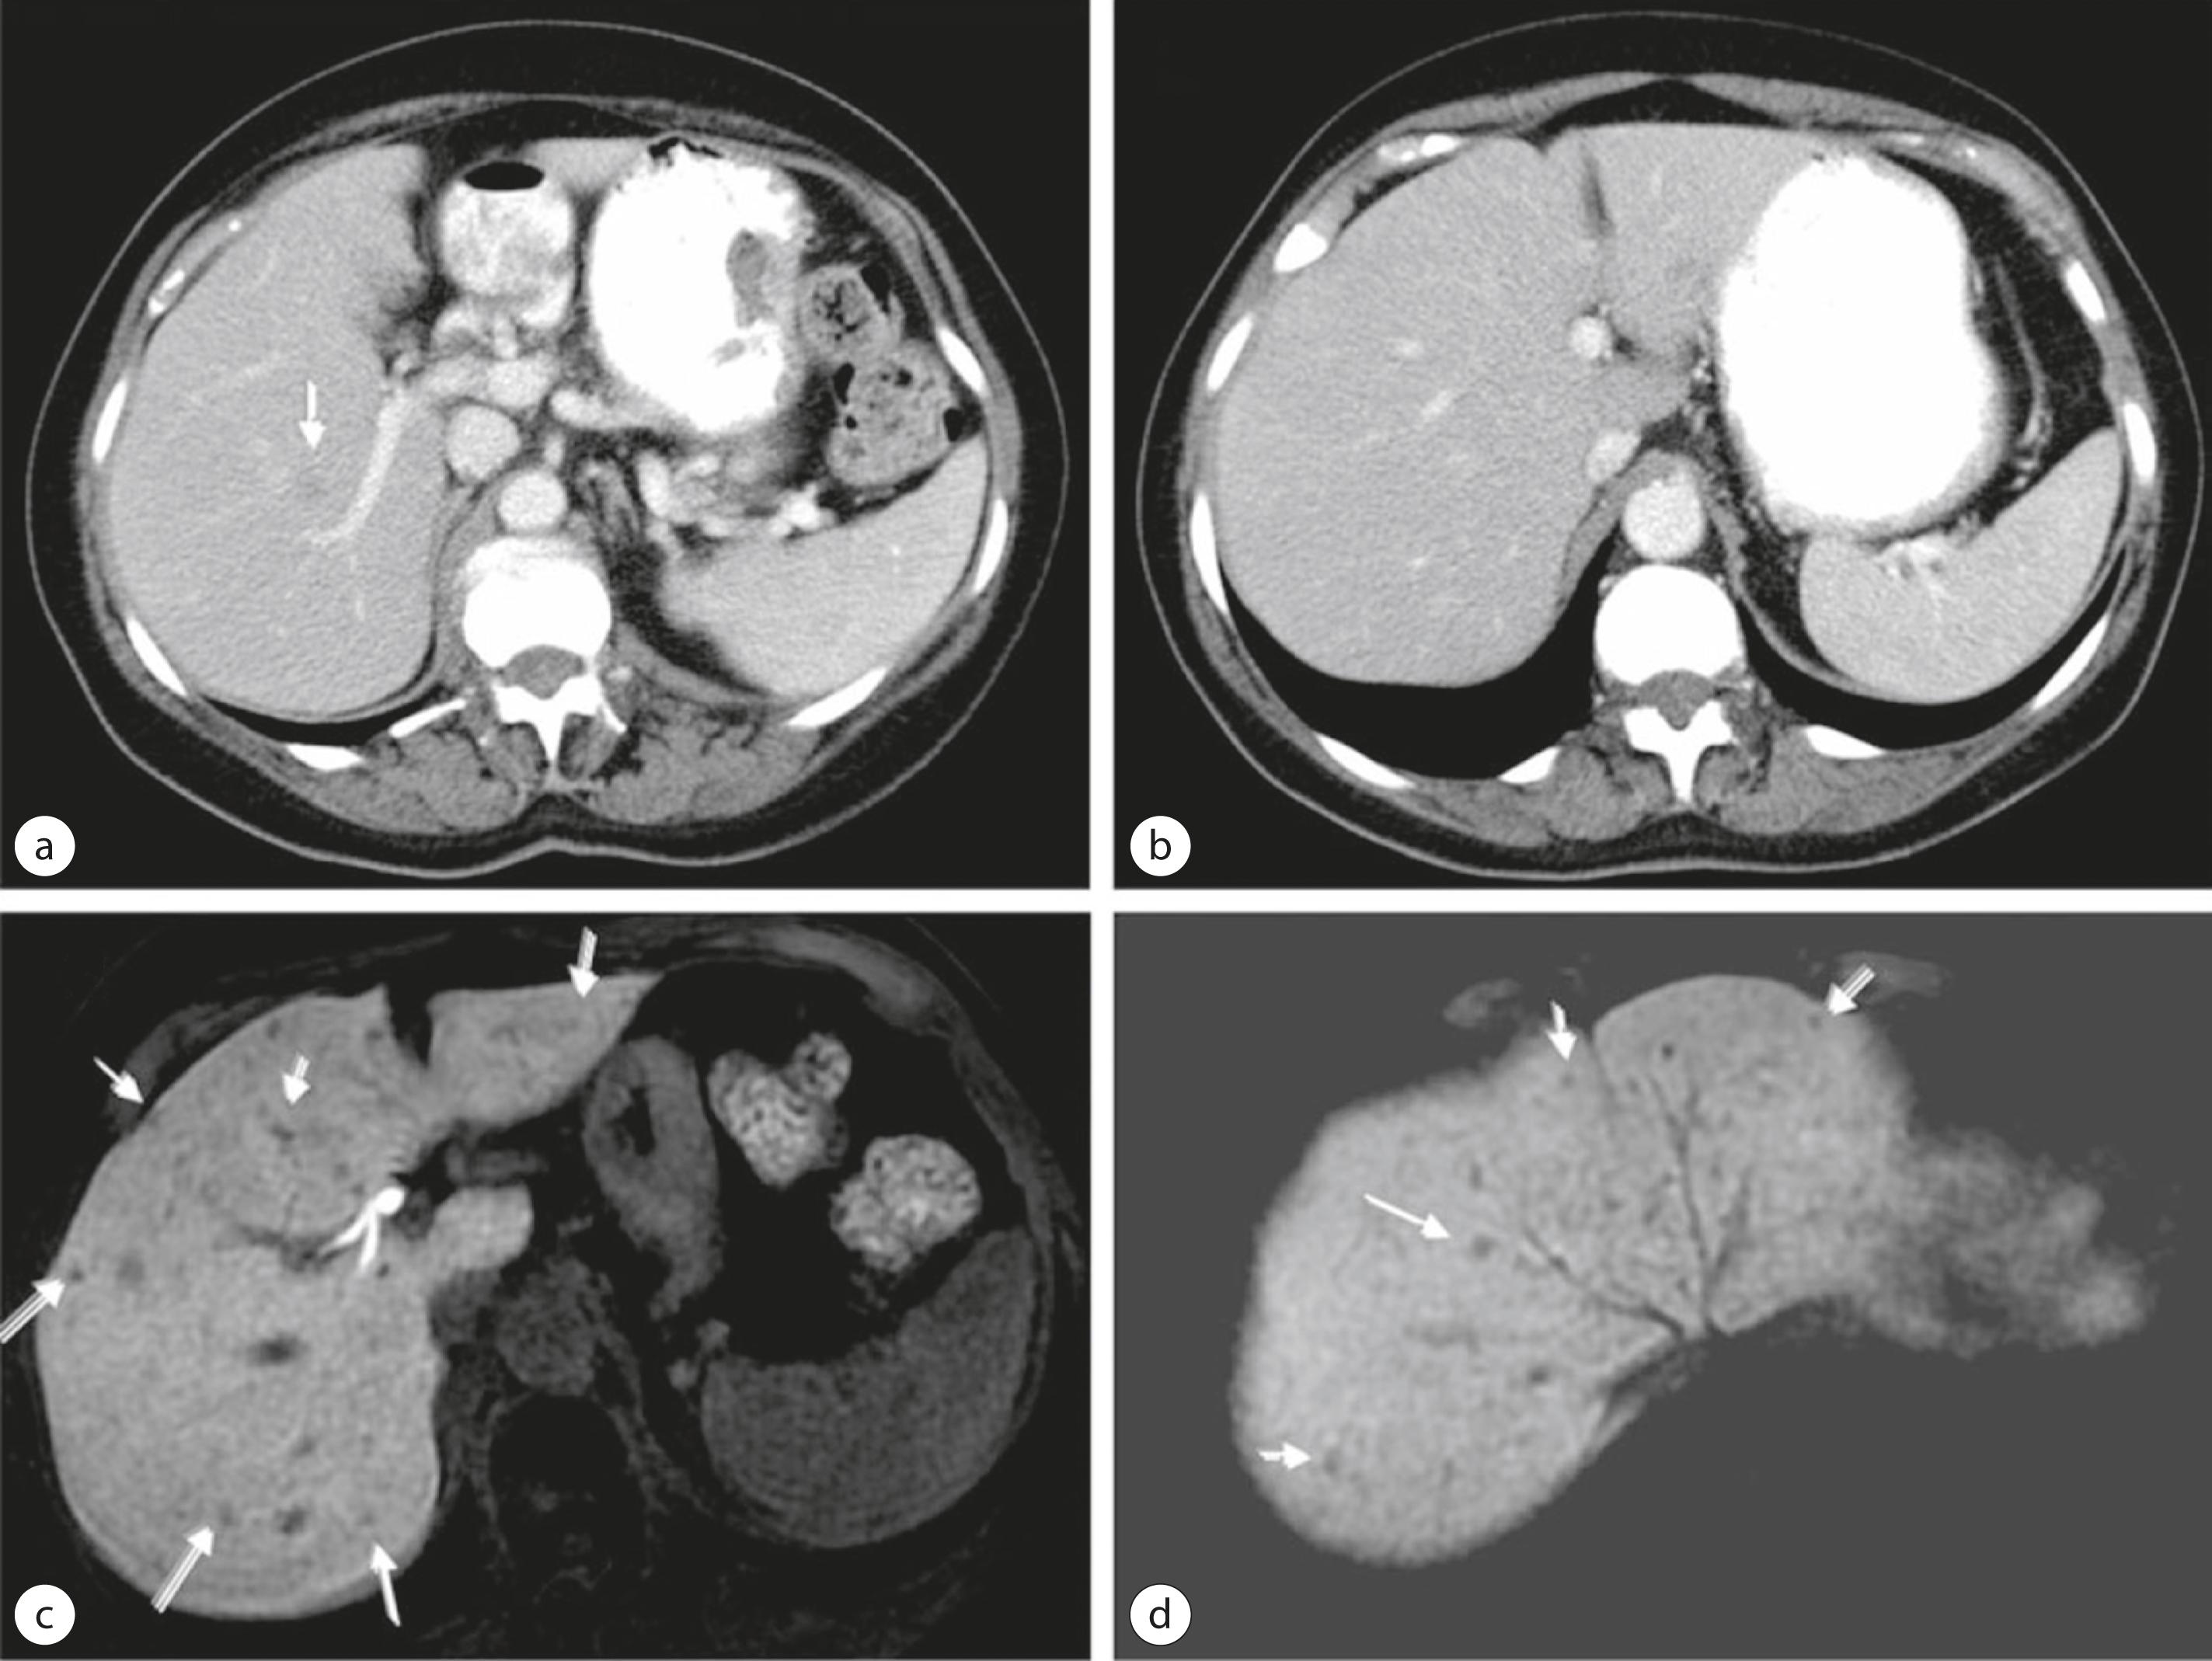 Figure 7.4, A 44-year-old man, with stage III colon cancer who underwent resection 1 year previously followed by adjuvant chemotherapy. Follow-up restaging CT (a, b) showed reduced liver attenuation in comparison with spleen due to steatosis and a possible lesion in the right lobe (arrow) . Liver MRI was performed with hepatobiliary contrast agent Eovist. On 10-minute delayed hepatobiliary phase, T1-weighted fat saturation MR images (c, d) demonstrate enhancing liver parenchyma and numerous non-enhancing, small metastases scattered within the right and left lobe of liver (arrows) . CT, computed tomography; MRI, magnetic resonance imaging.